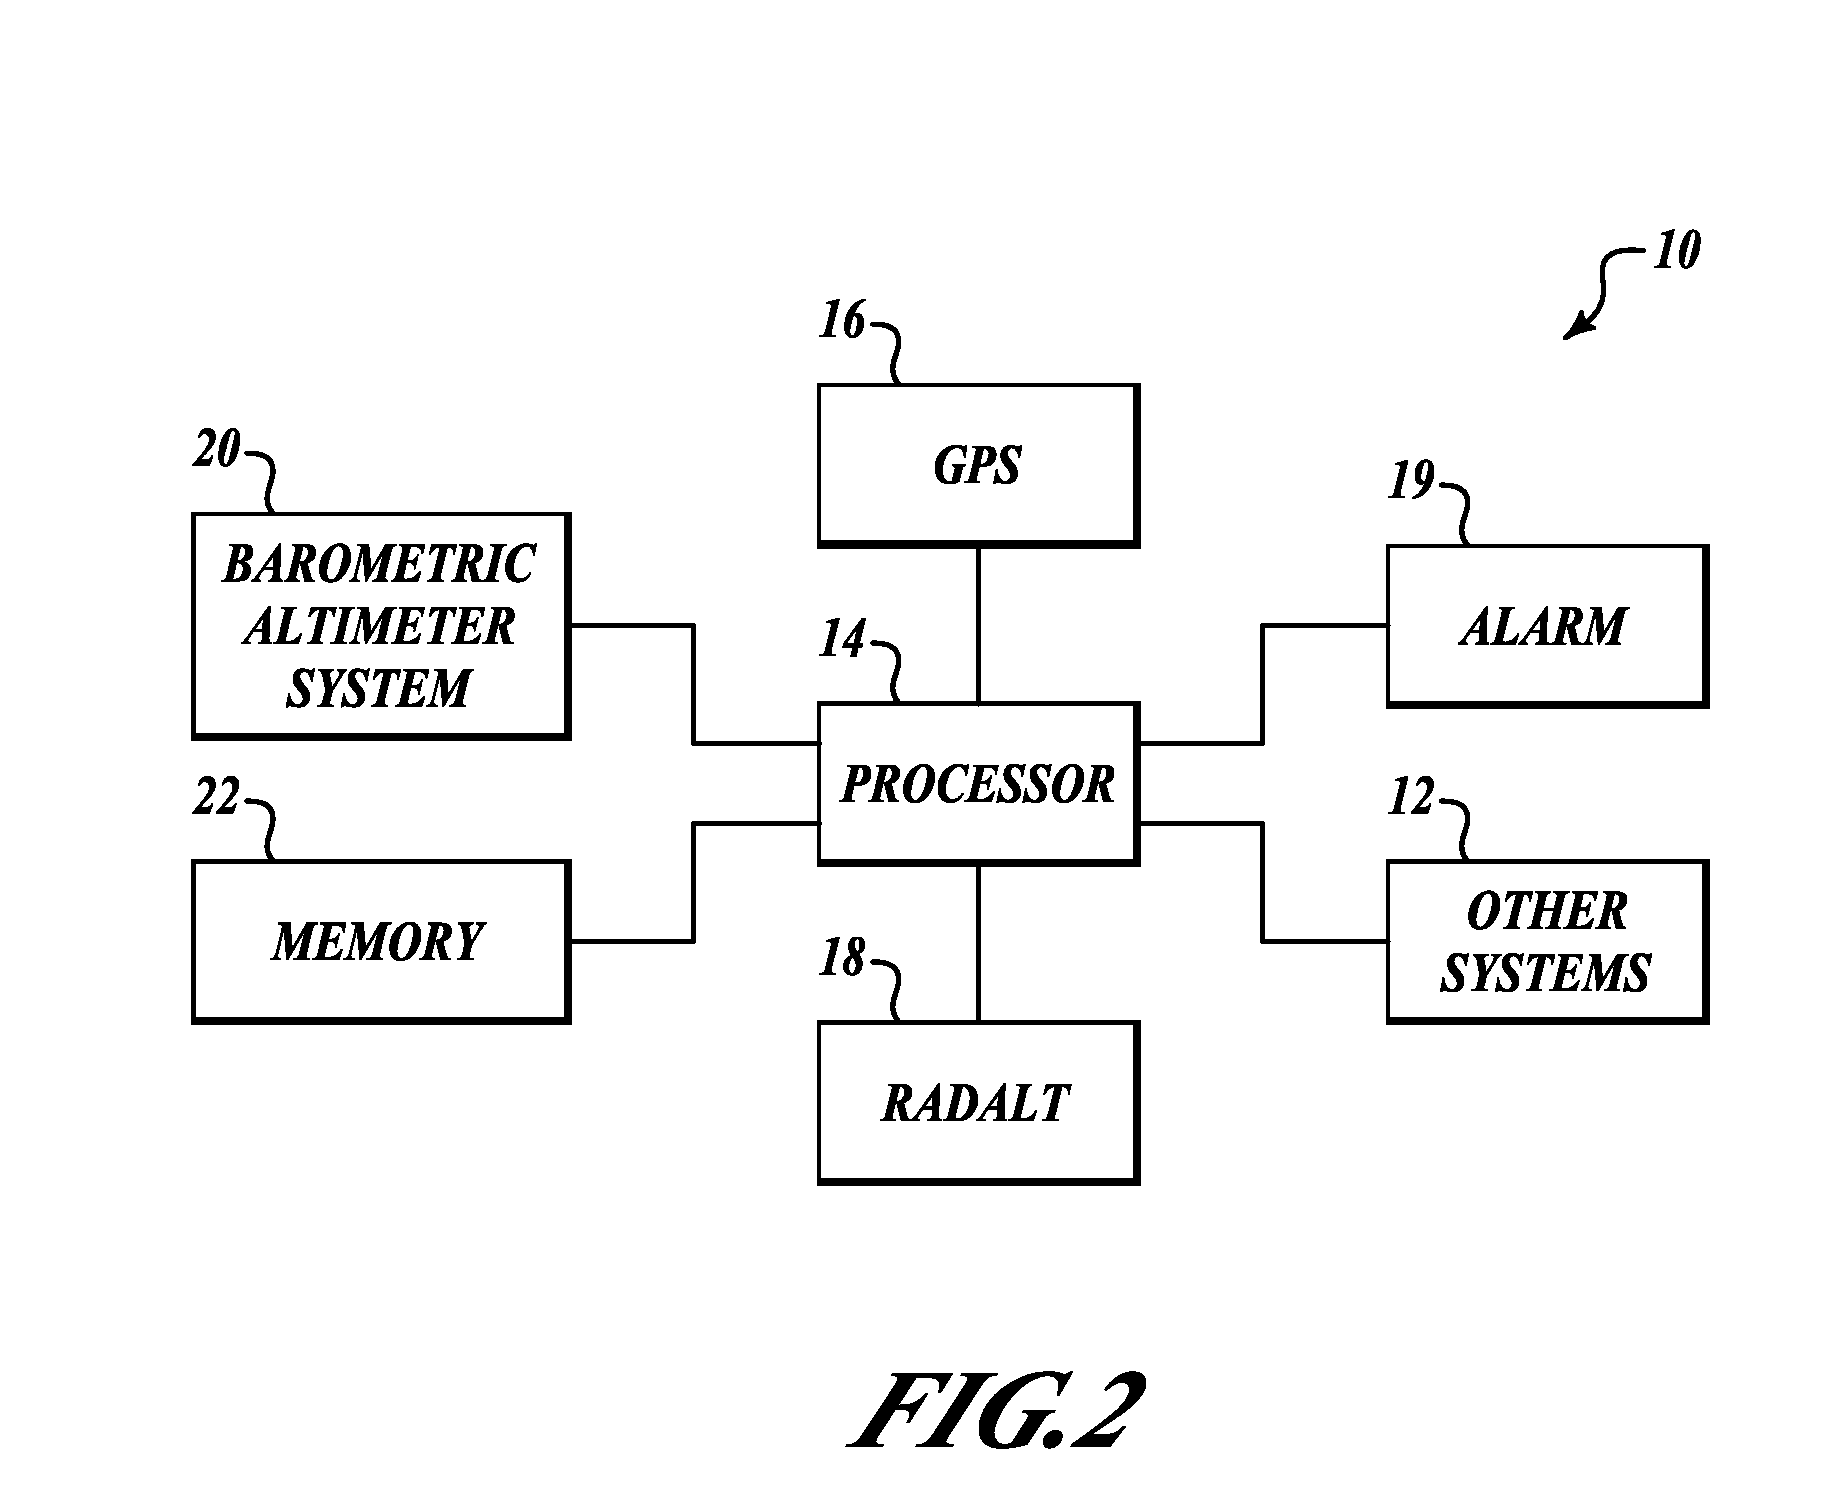 Systems and methods for automatic detection of QFE operations